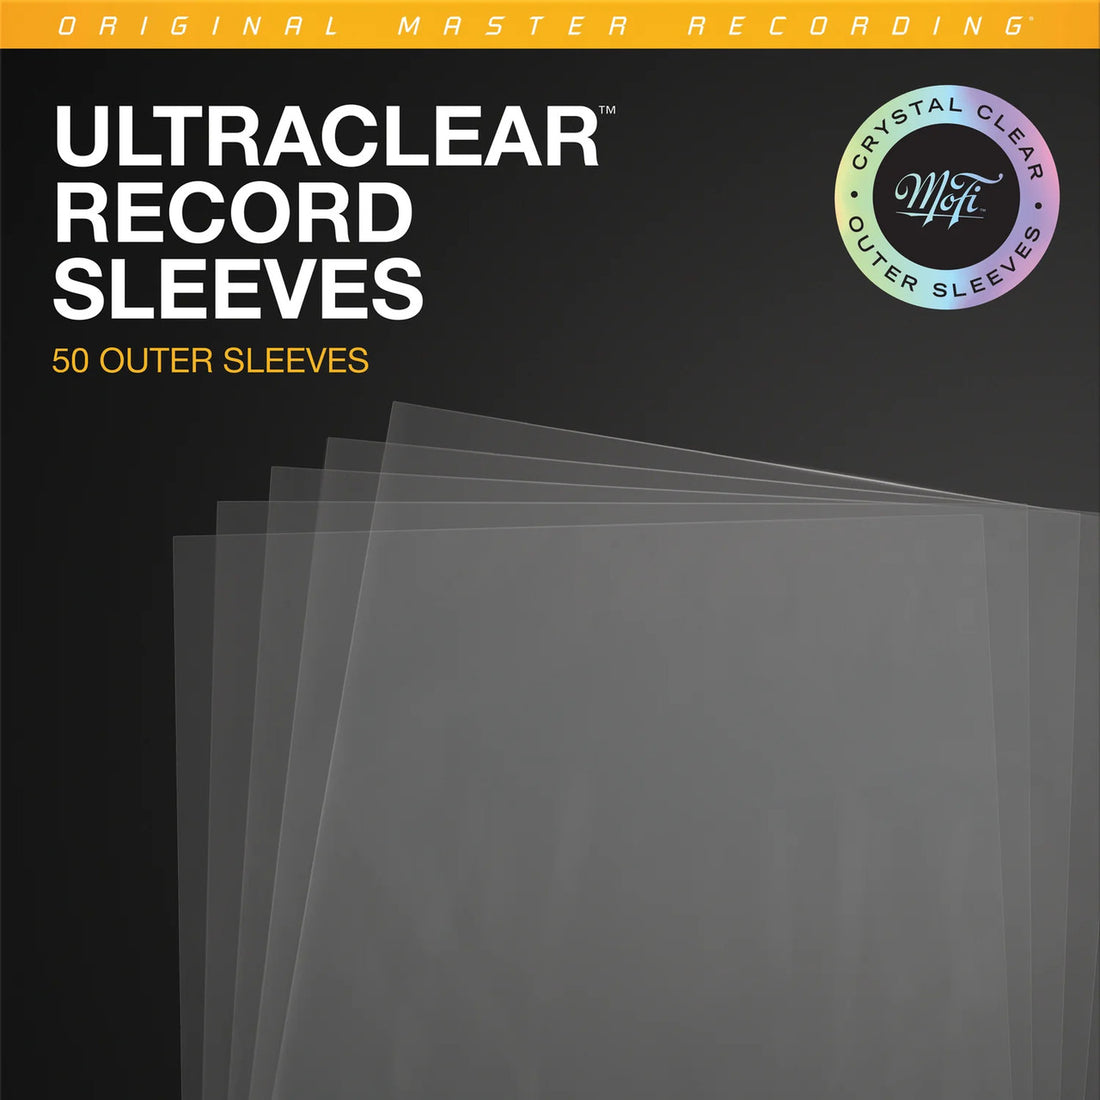 Archival Record Sleeves [UltraClear] (50 units)